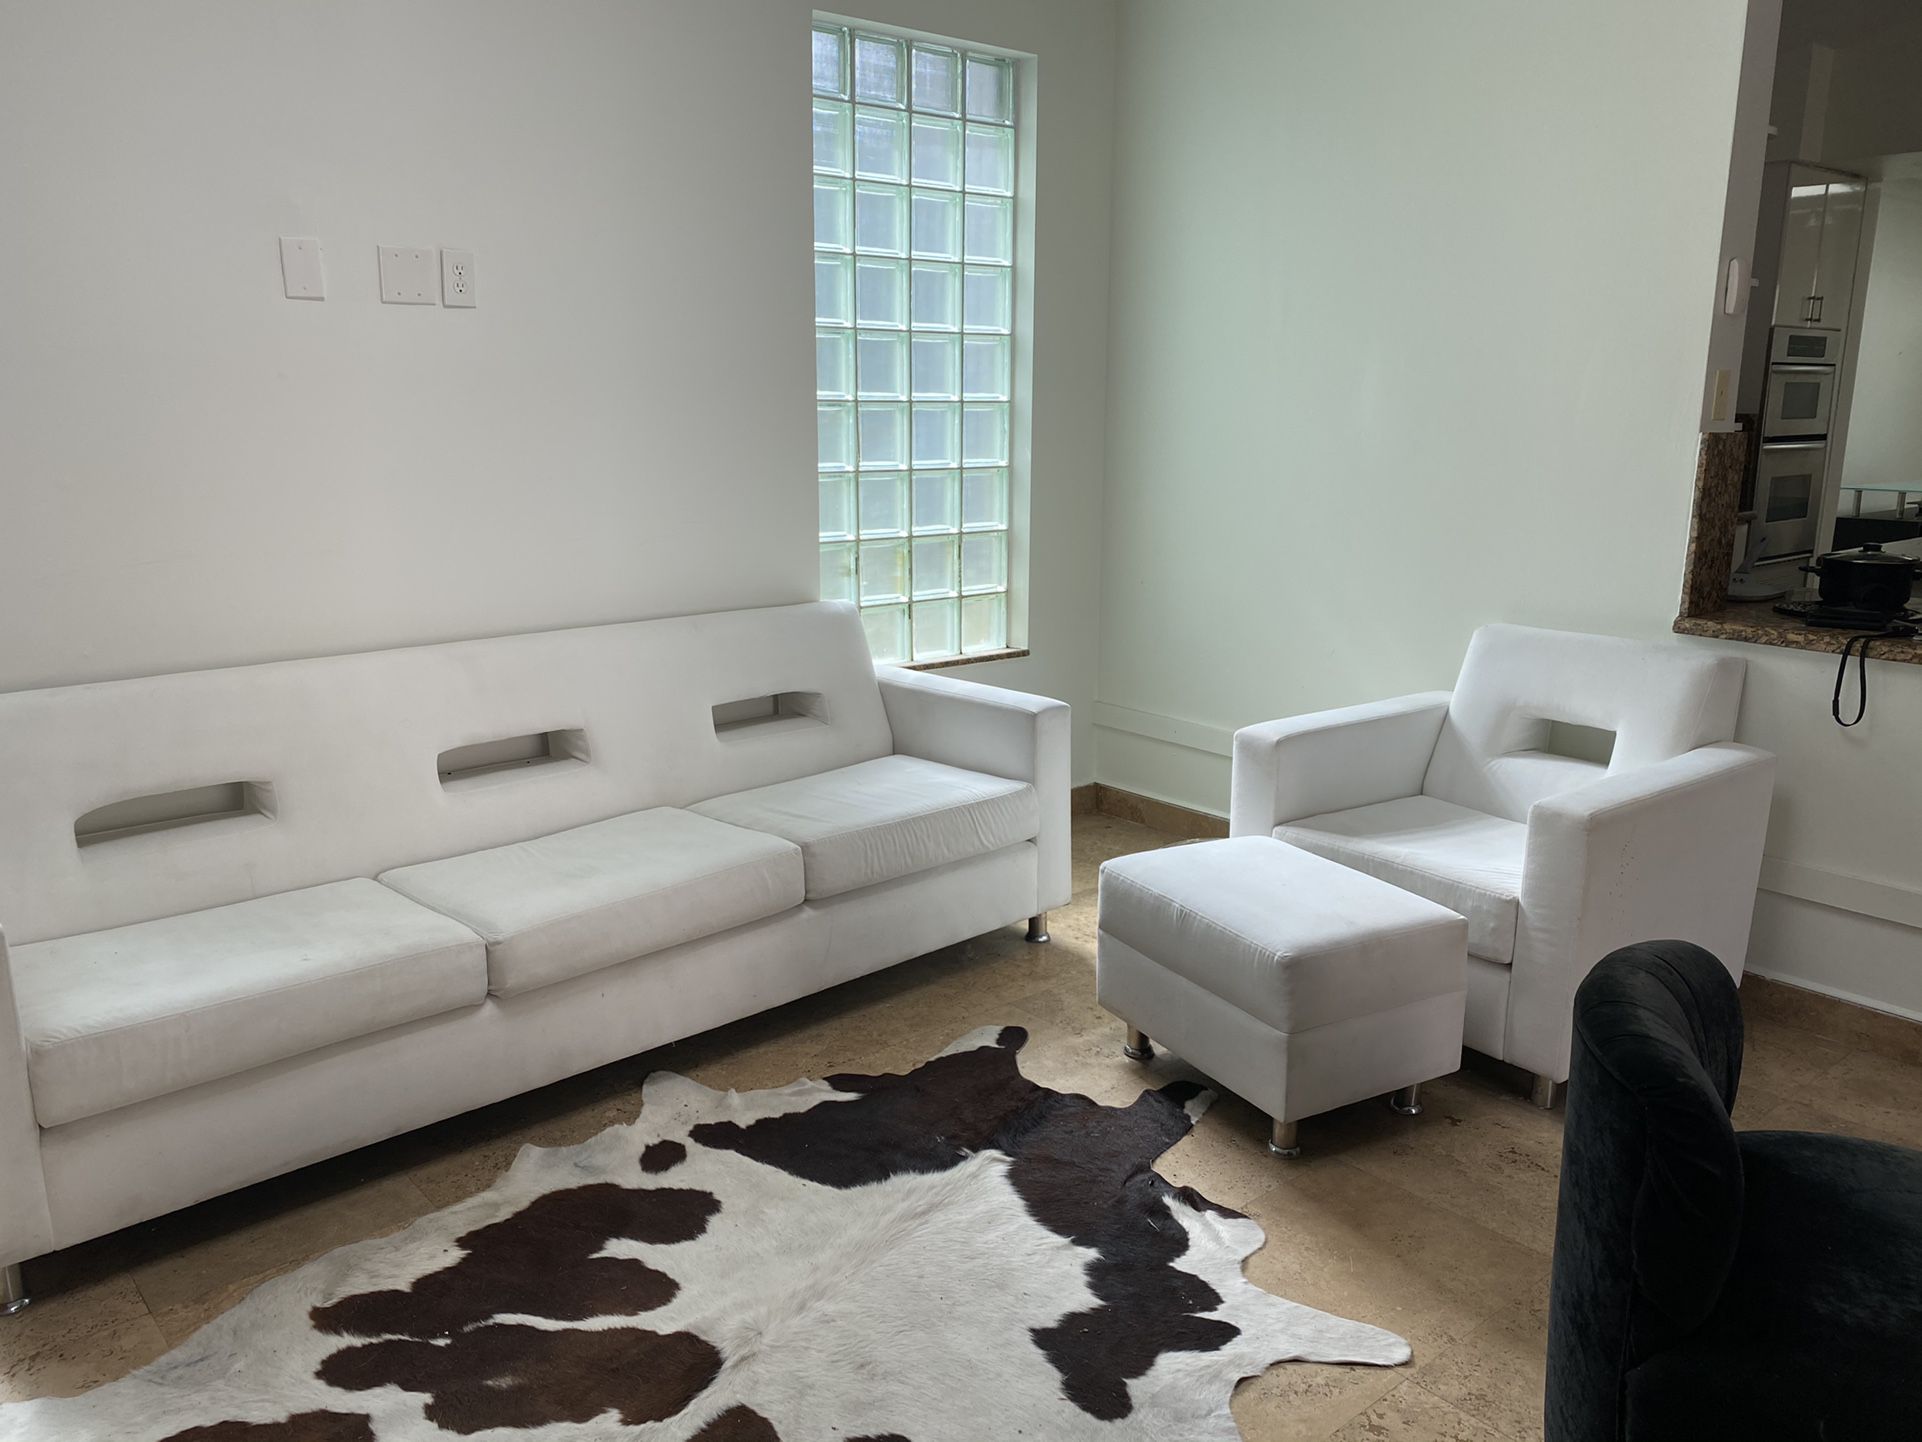 White Upholstery Sofa, Chair, Ottoman And 2 Chairs